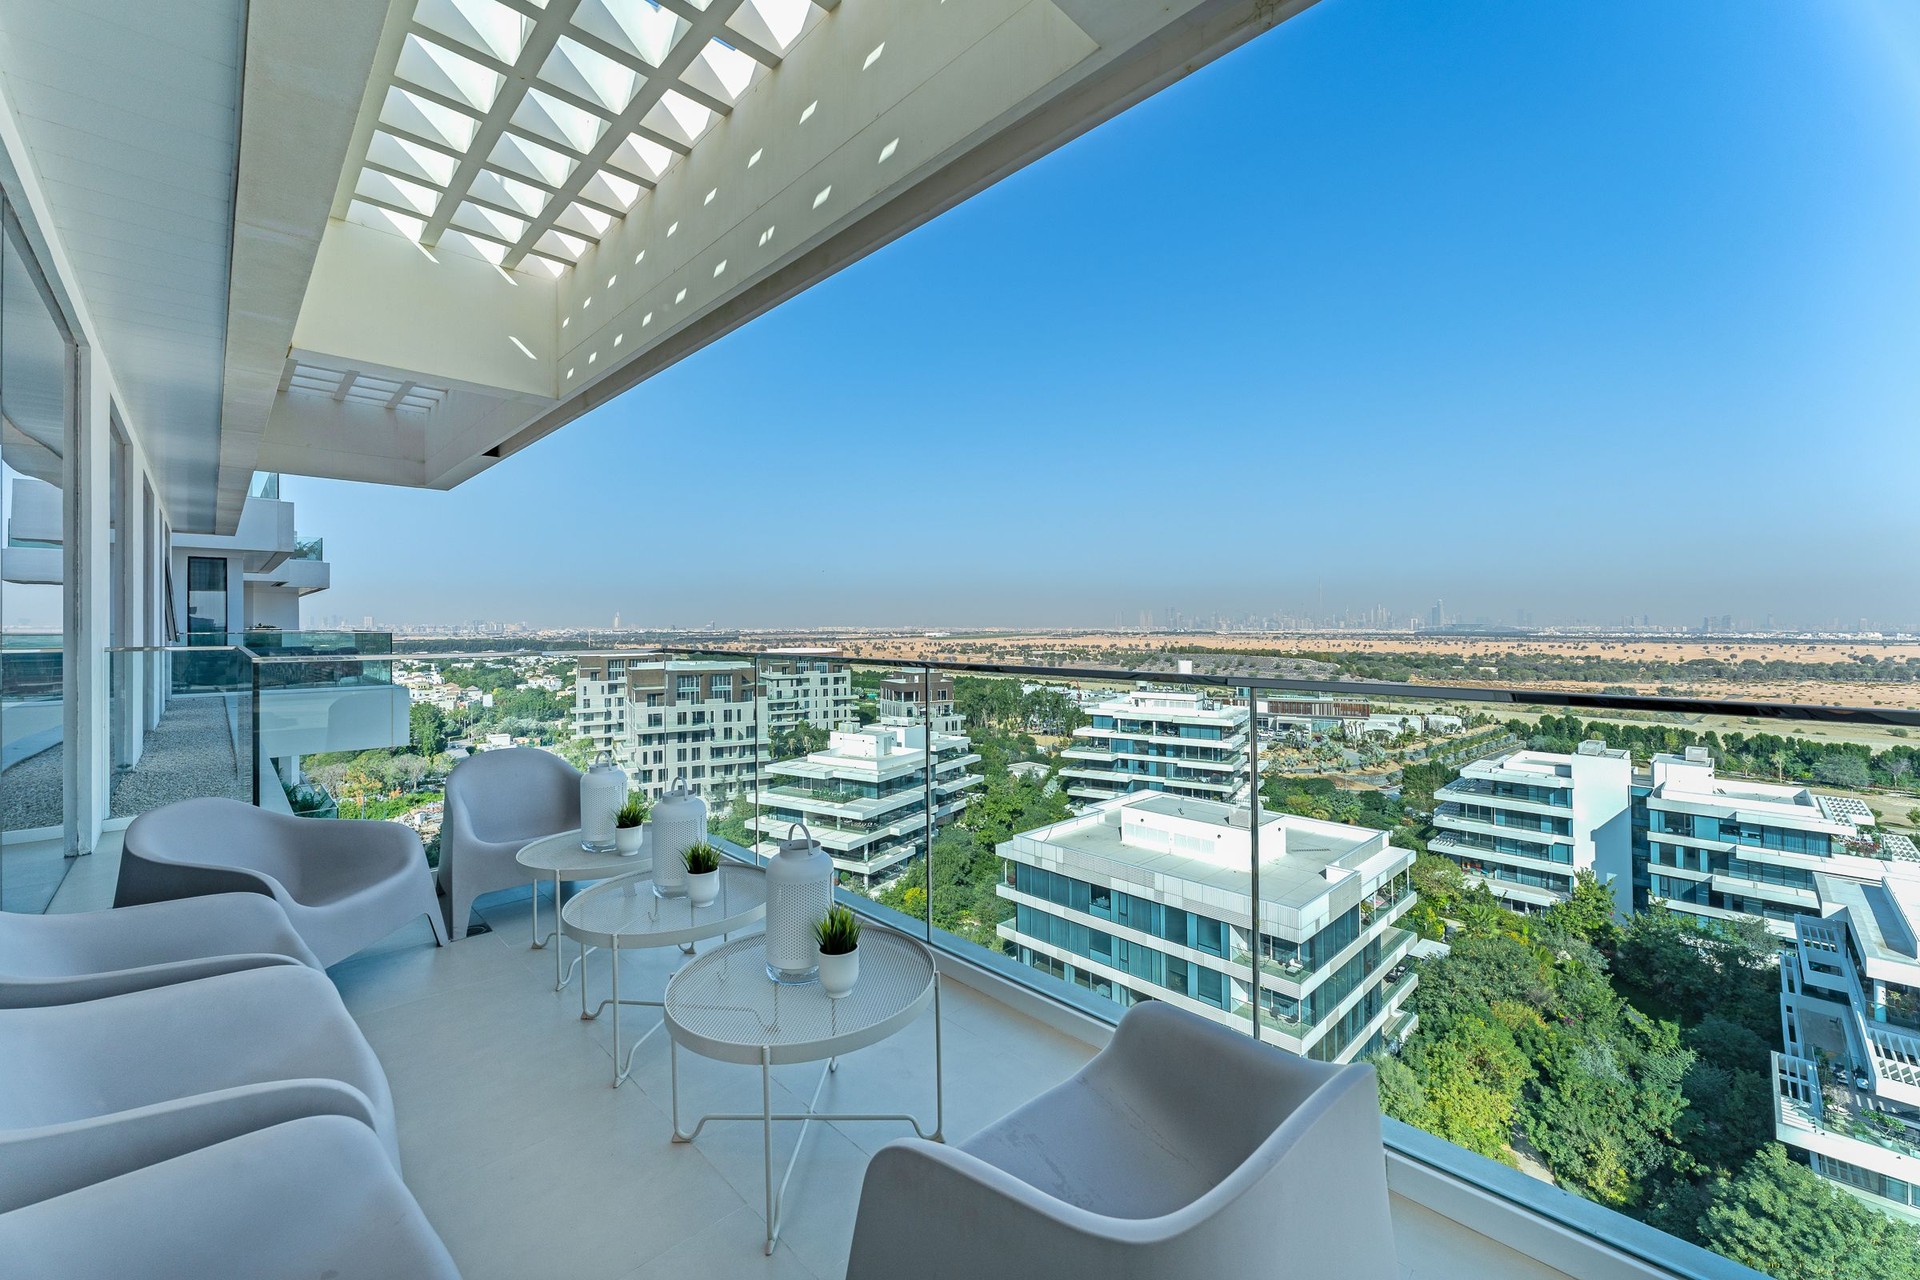 Modern Penthouse Apartment with Panoramic Views in Al Barari: Image 1